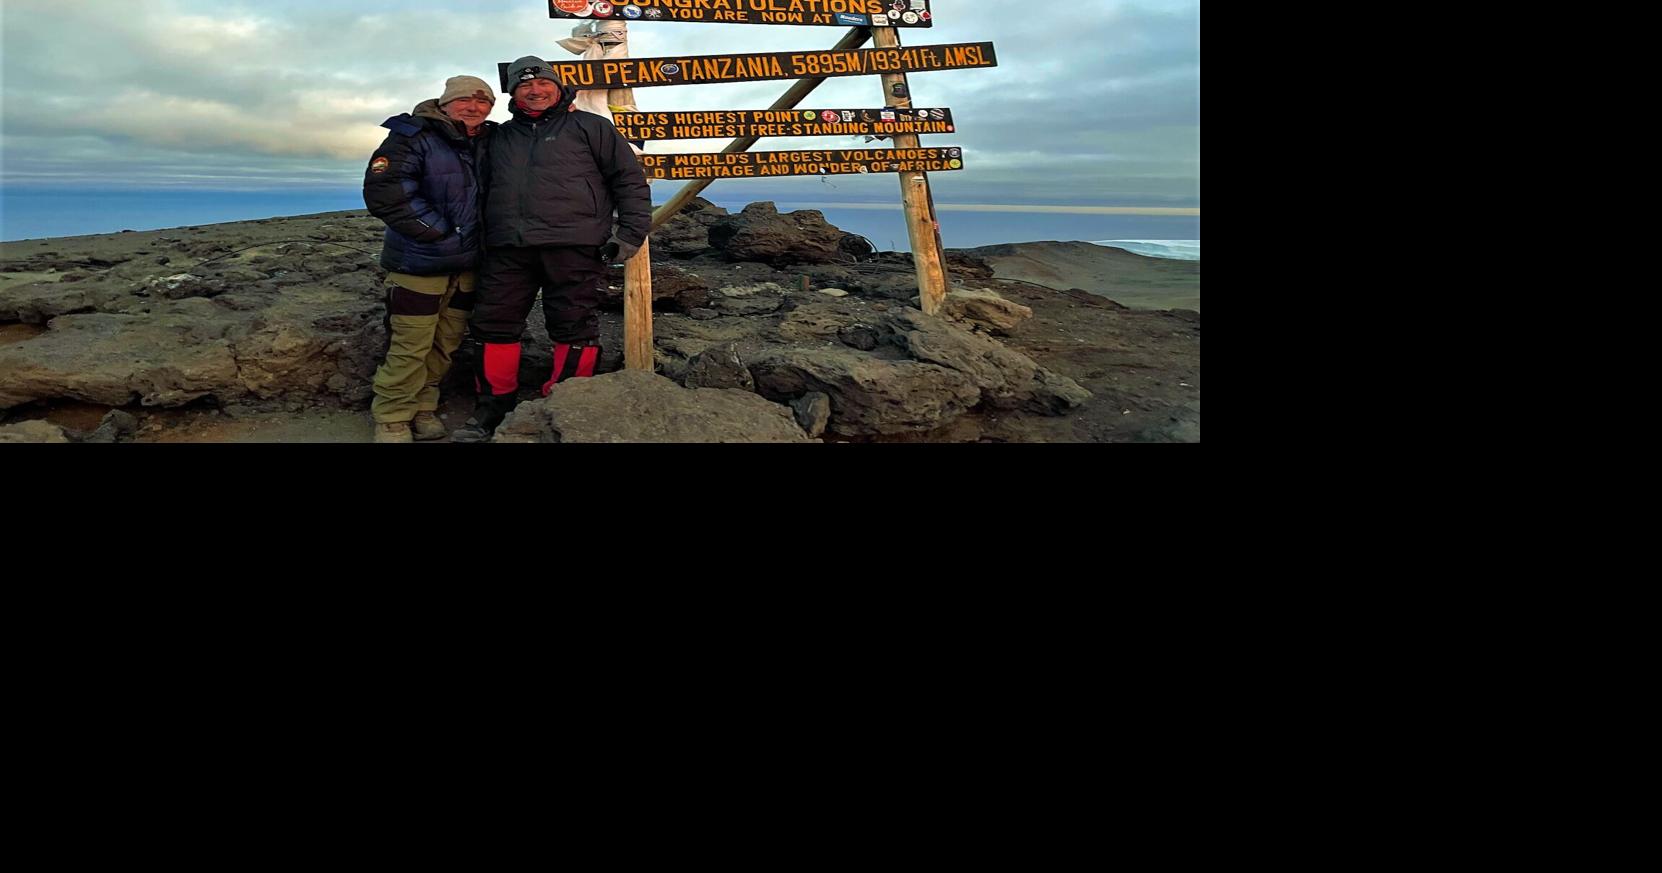 MARK BENNETT: A father-son outing ... to of Mount Kilimanjaro | News | tribstar.com